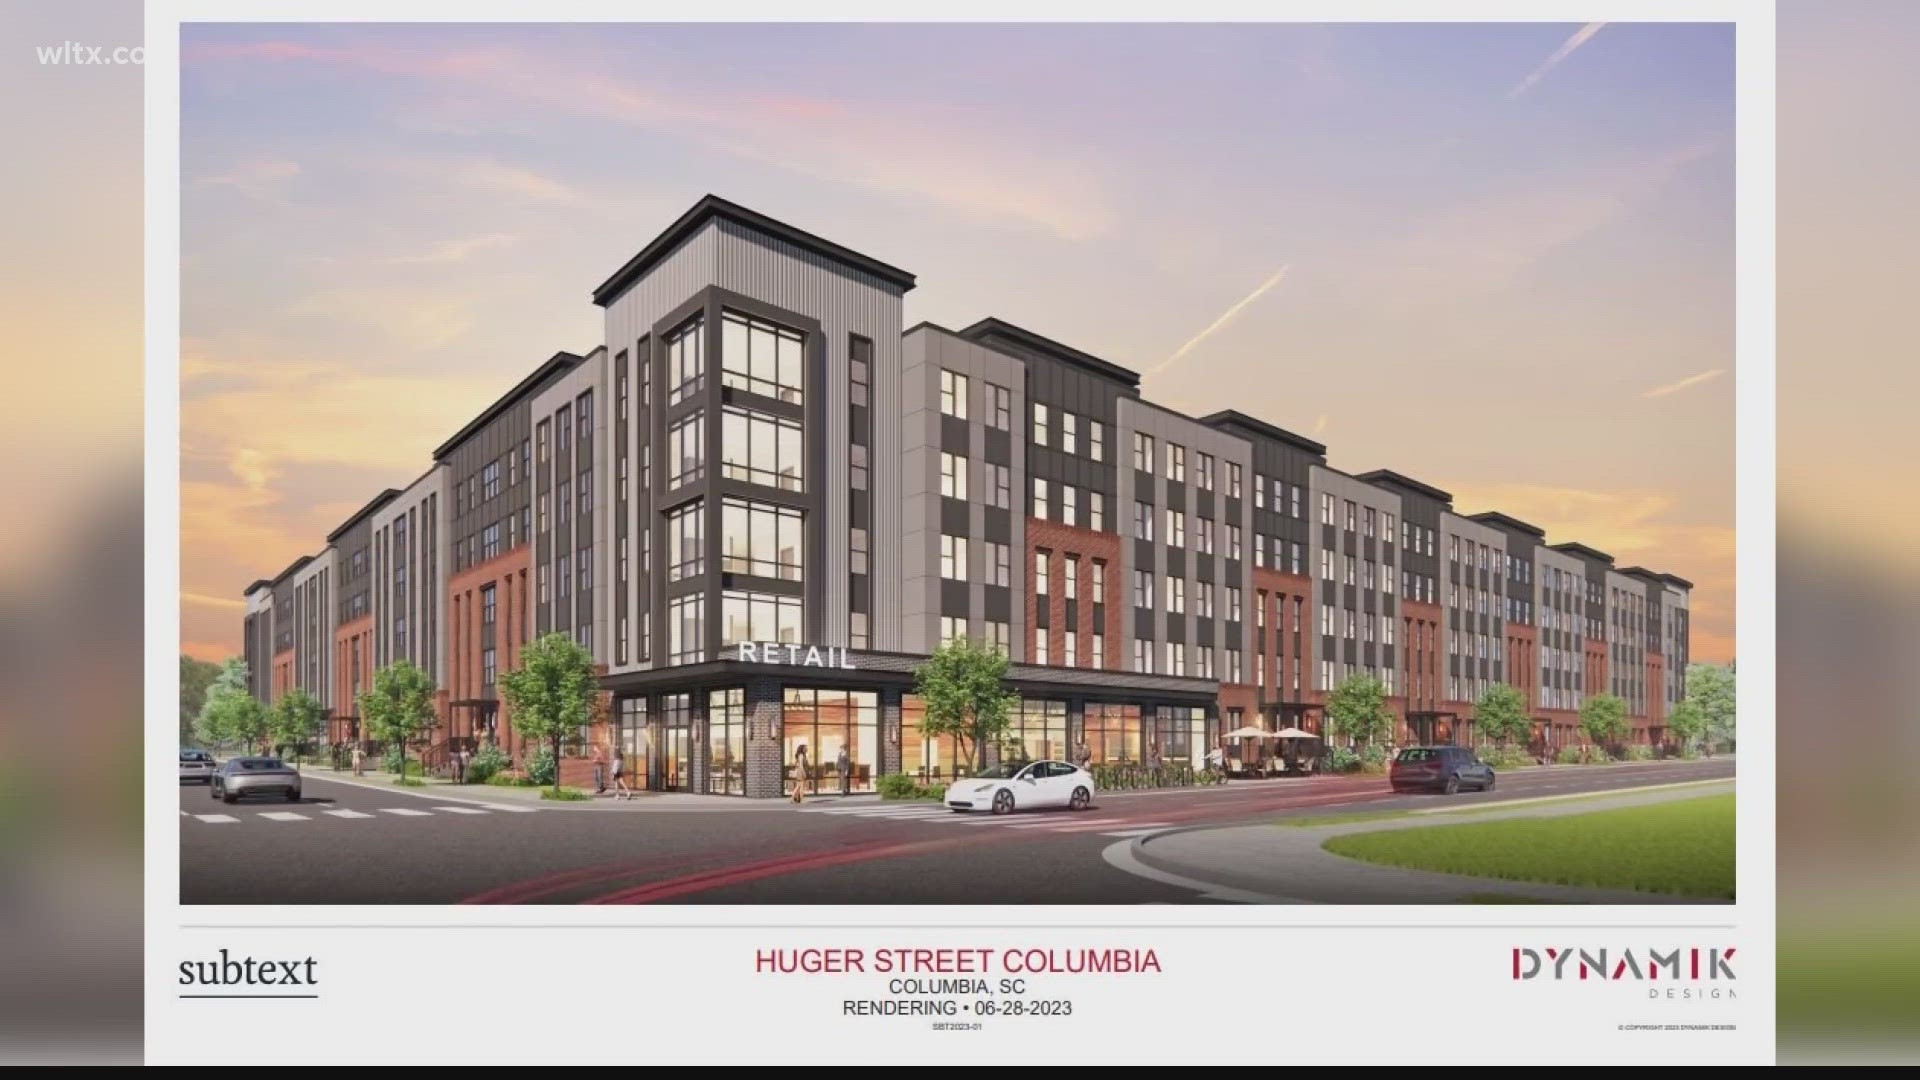 A proposed student housing complex that would house hundreds of students just got a step closer to reality in downtown Columbia.